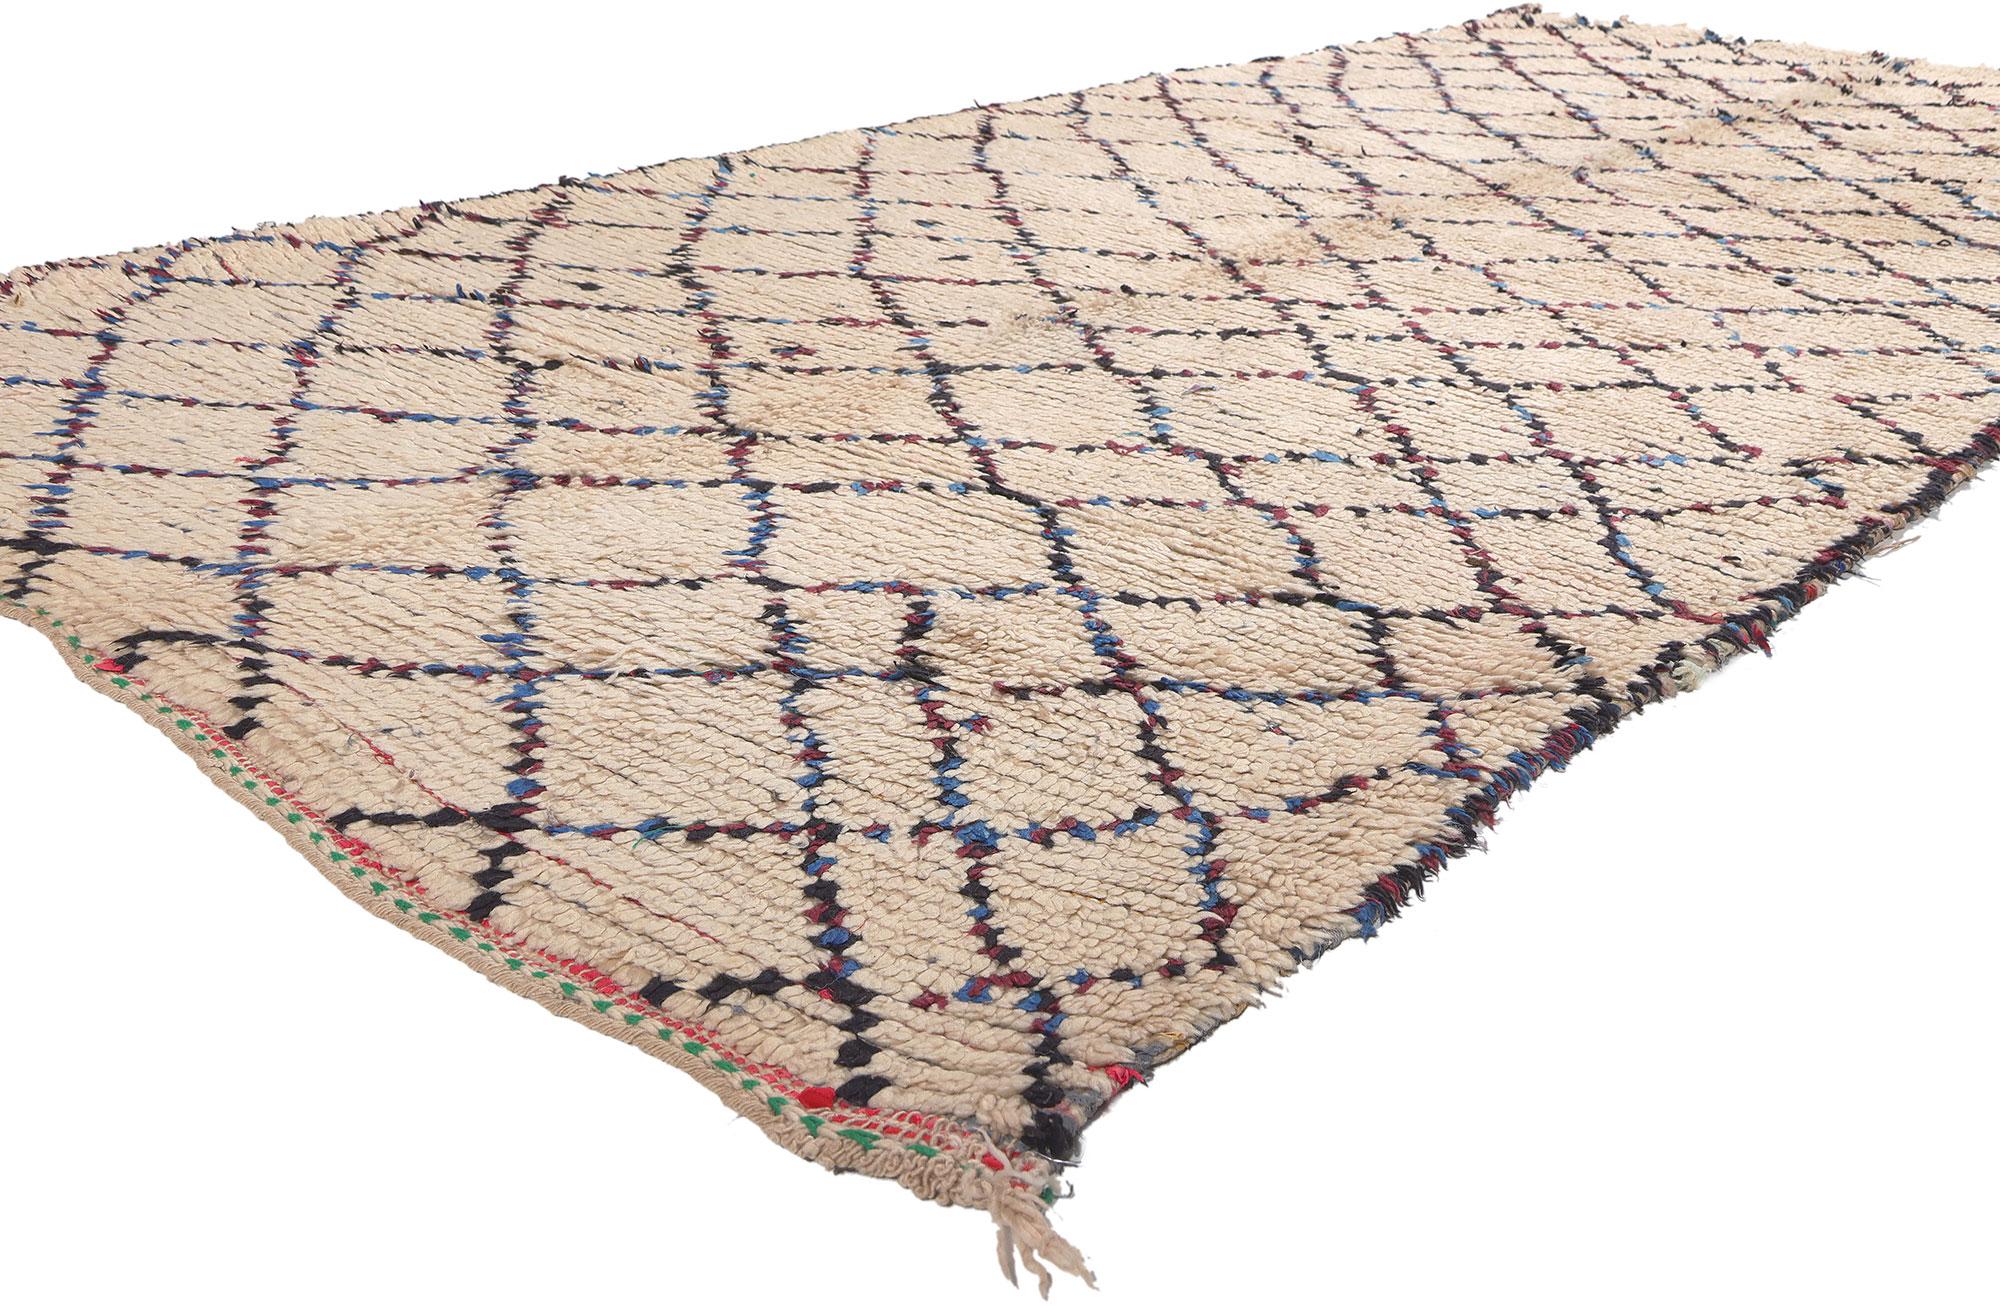 74833 Vintage Boucherouite Moroccan Azilal Rag Rug, 04’09 x 10’00. Forged through the timeless tradition of hand-knotting, this vintage Boucherouite Moroccan rag rug is a testament to the artistry of the Berber Tribes in the Azilal Region, nestled